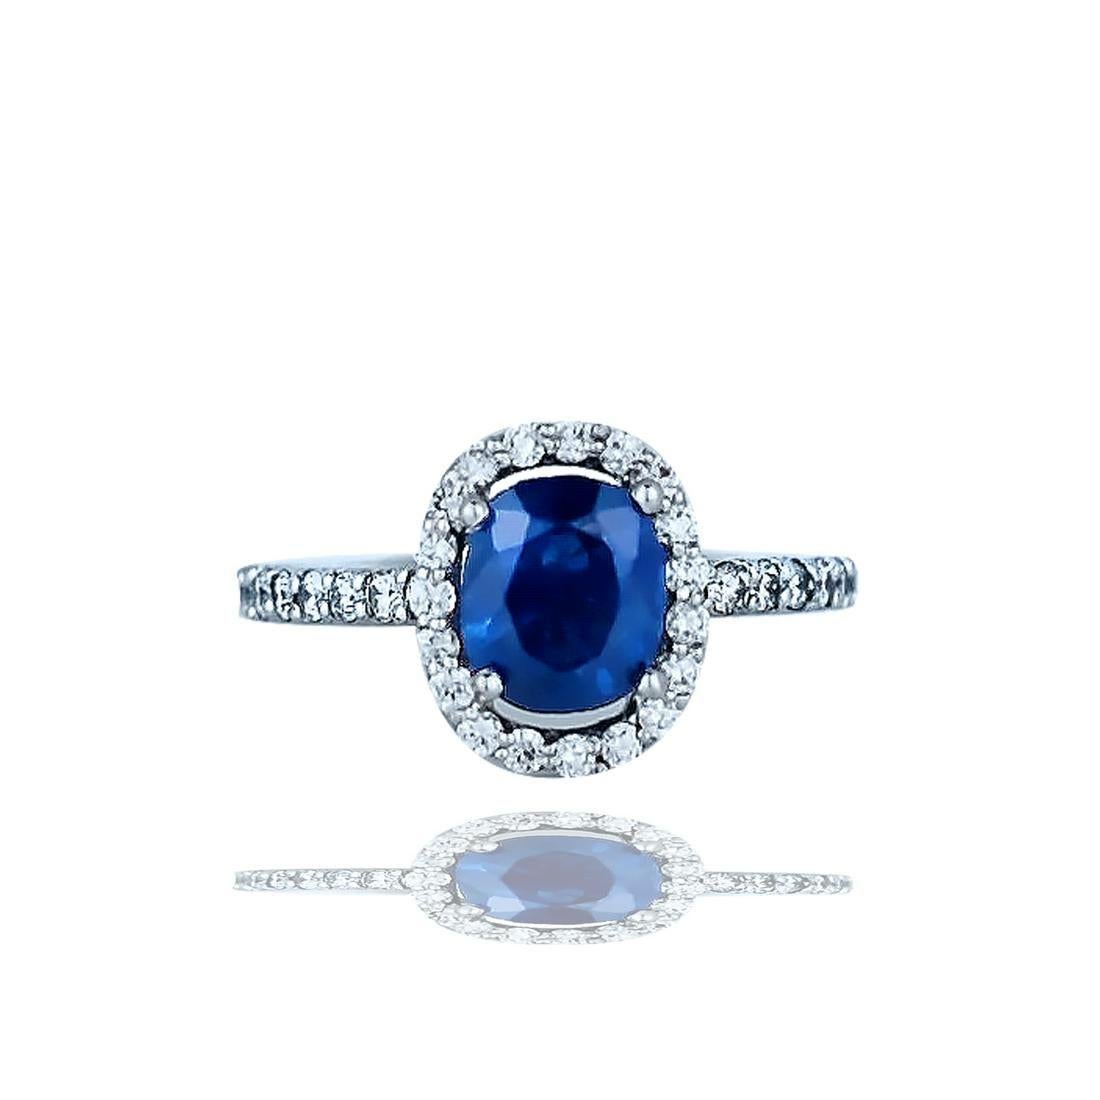 Halo, Sapphire and Diamond Ring weighting 2.82 total carat weight in this stunning solitaire setting. 

The center blue sapphire is oval shaped measuring 7.71-6.70 x 4.56 mm with a estimated weight of 1.97 carats. The blue color is a beautiful with